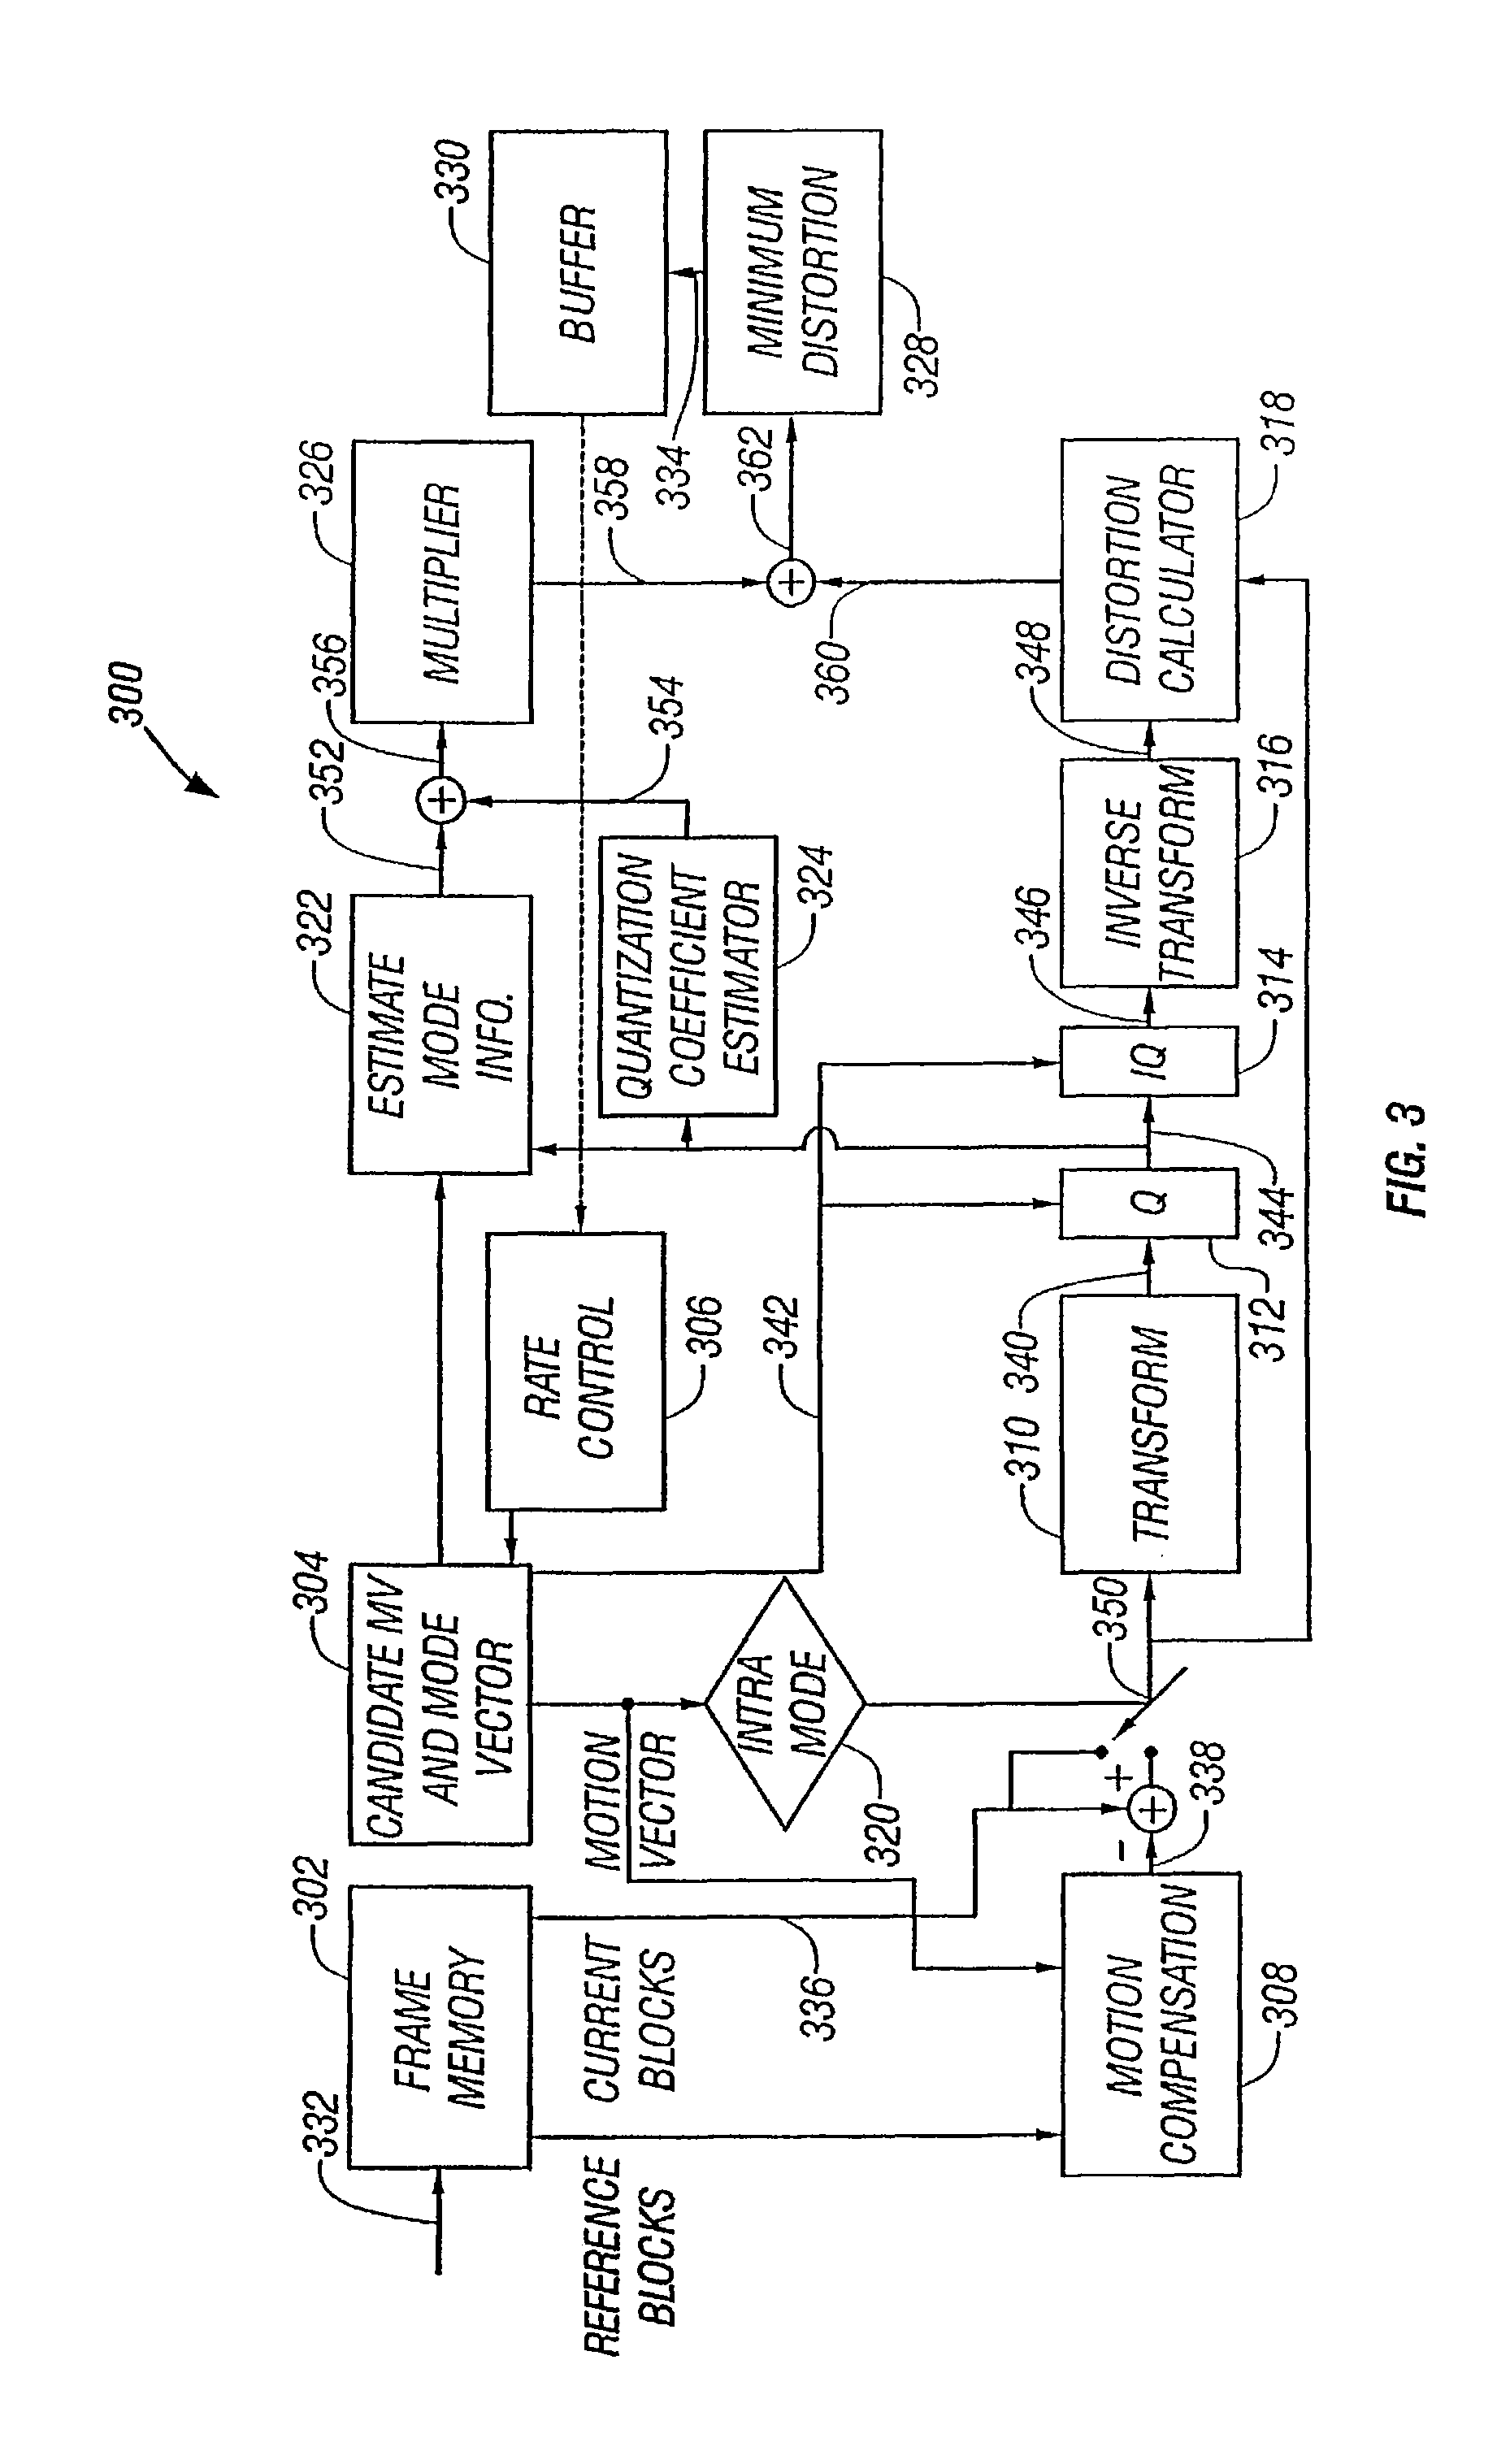 Optimal encoding of motion compensated video